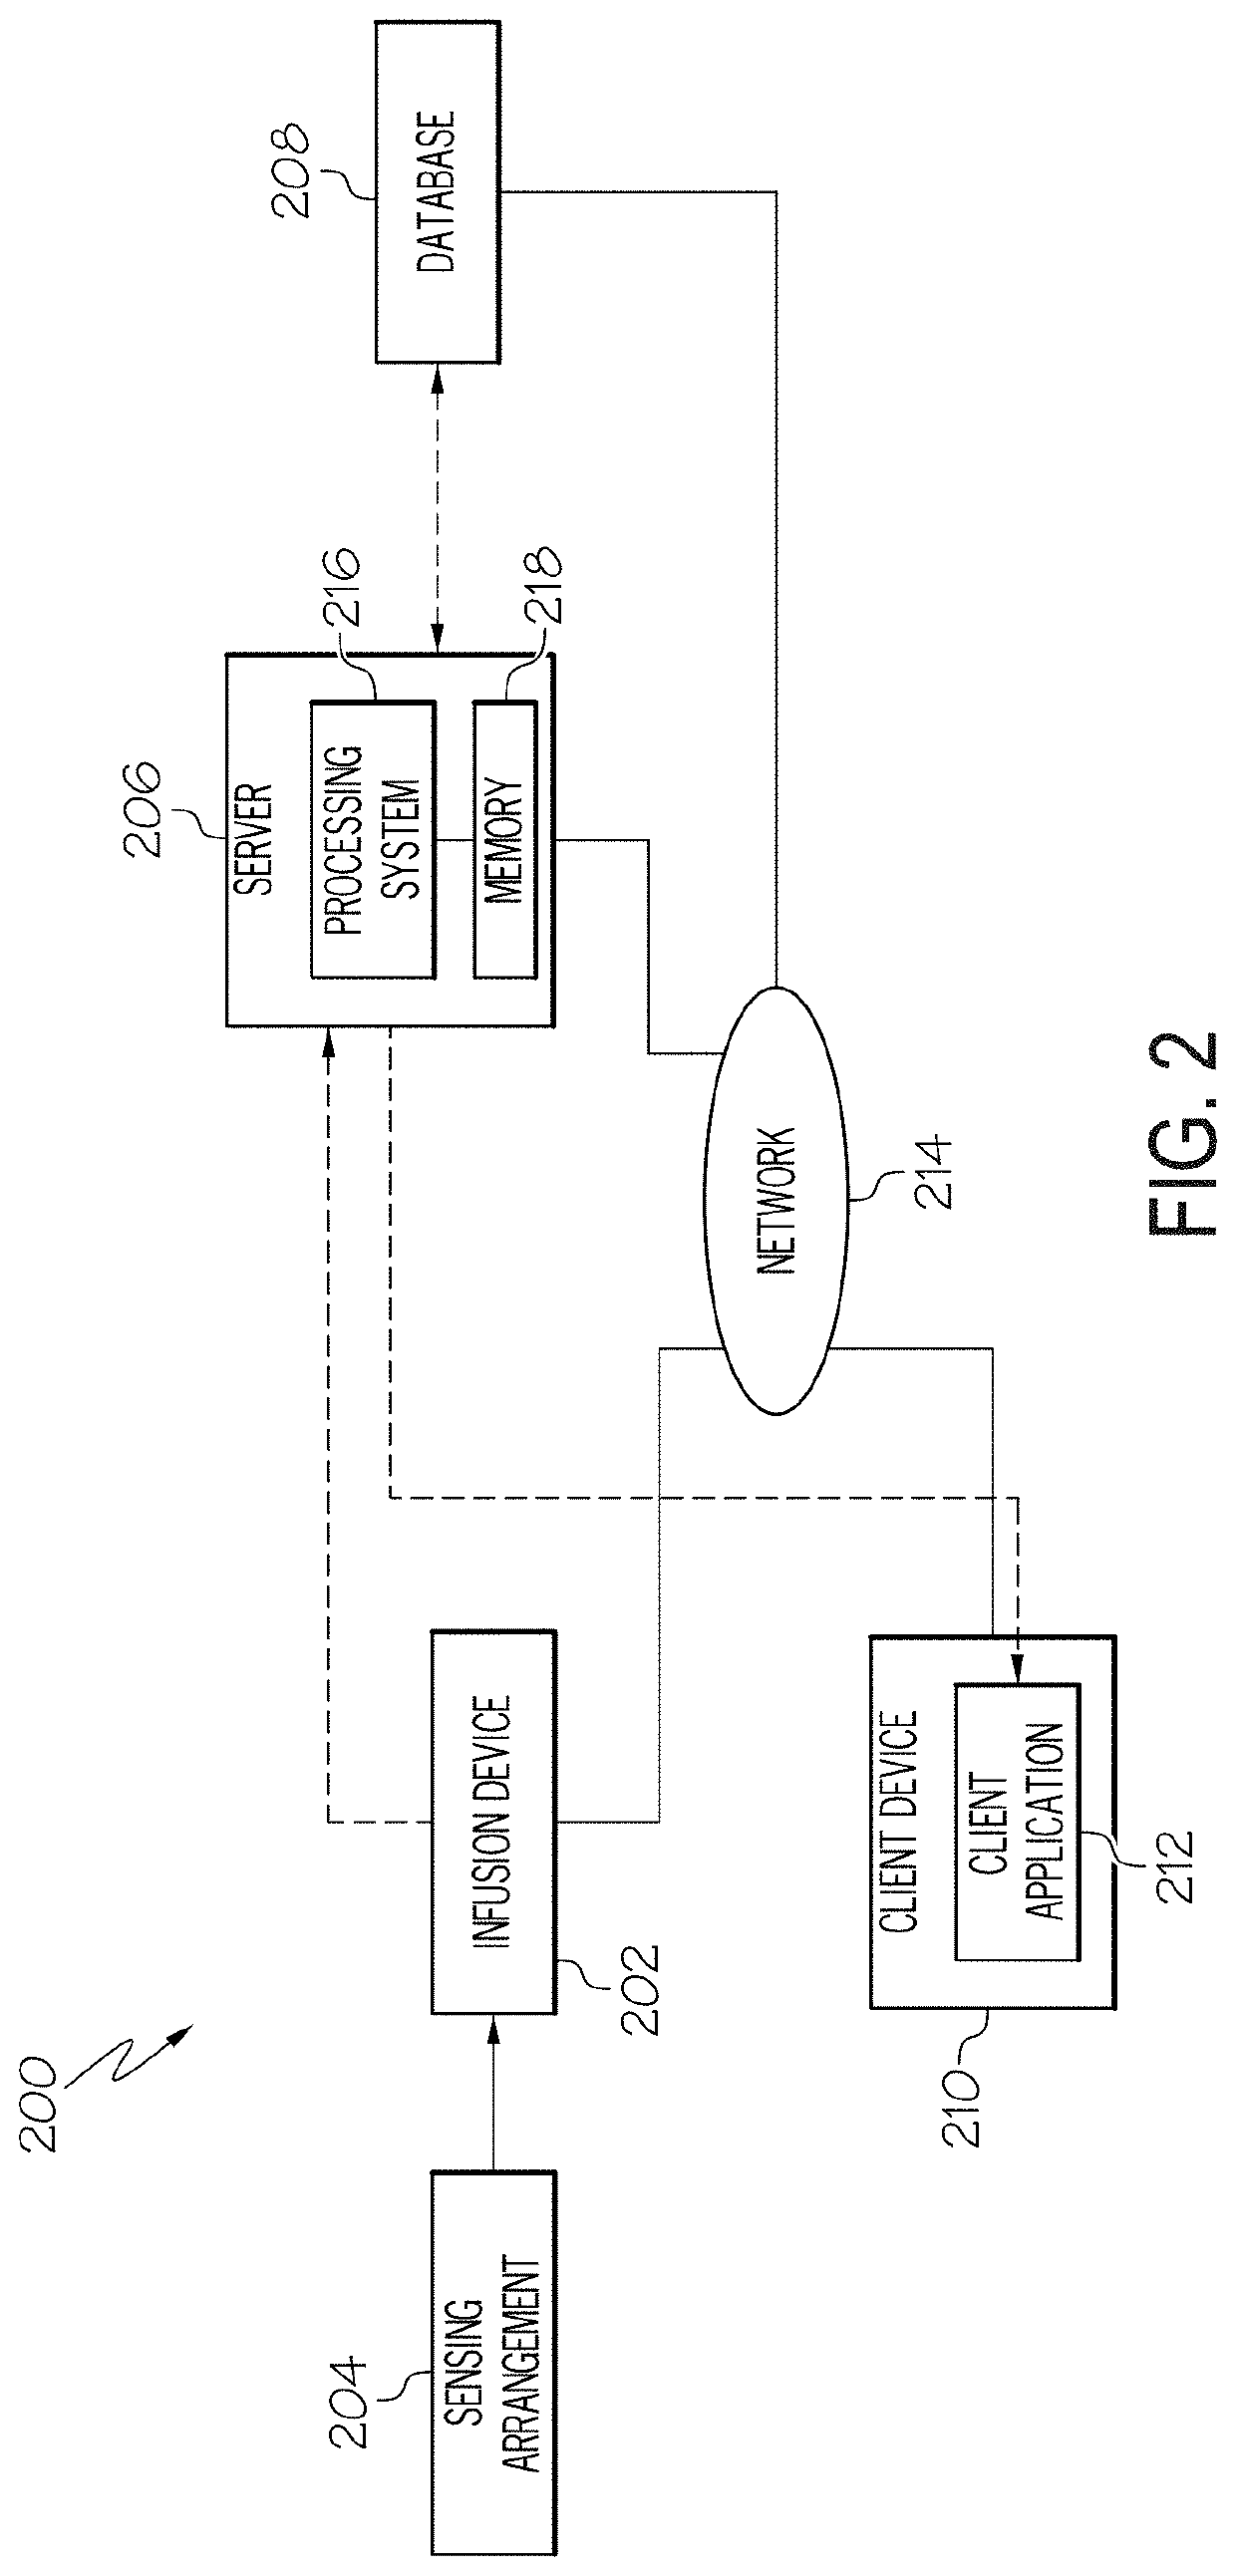 Medical devices and related event pattern presentation methods